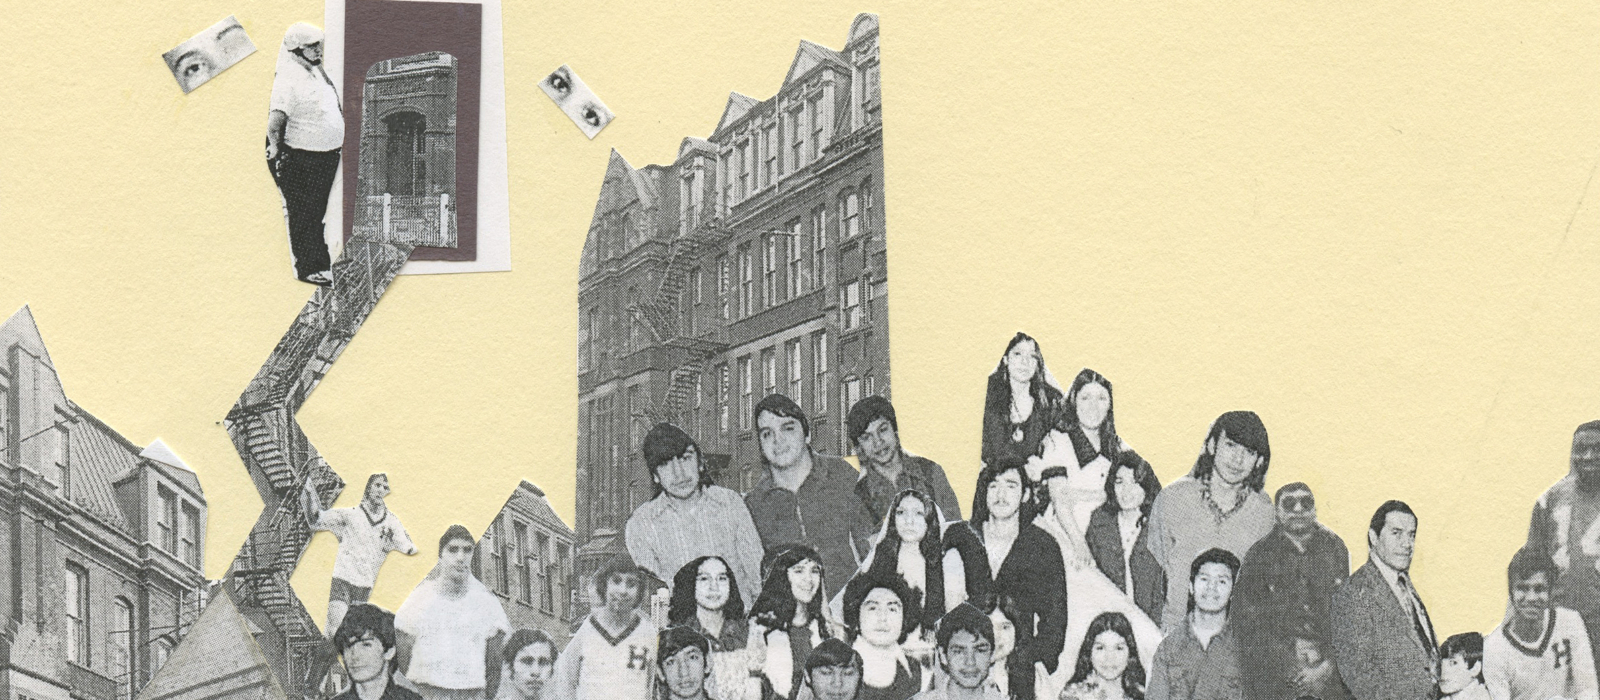 Collage using pictures of Froebel School, a site of the 1973 student uprisings in Chicago.